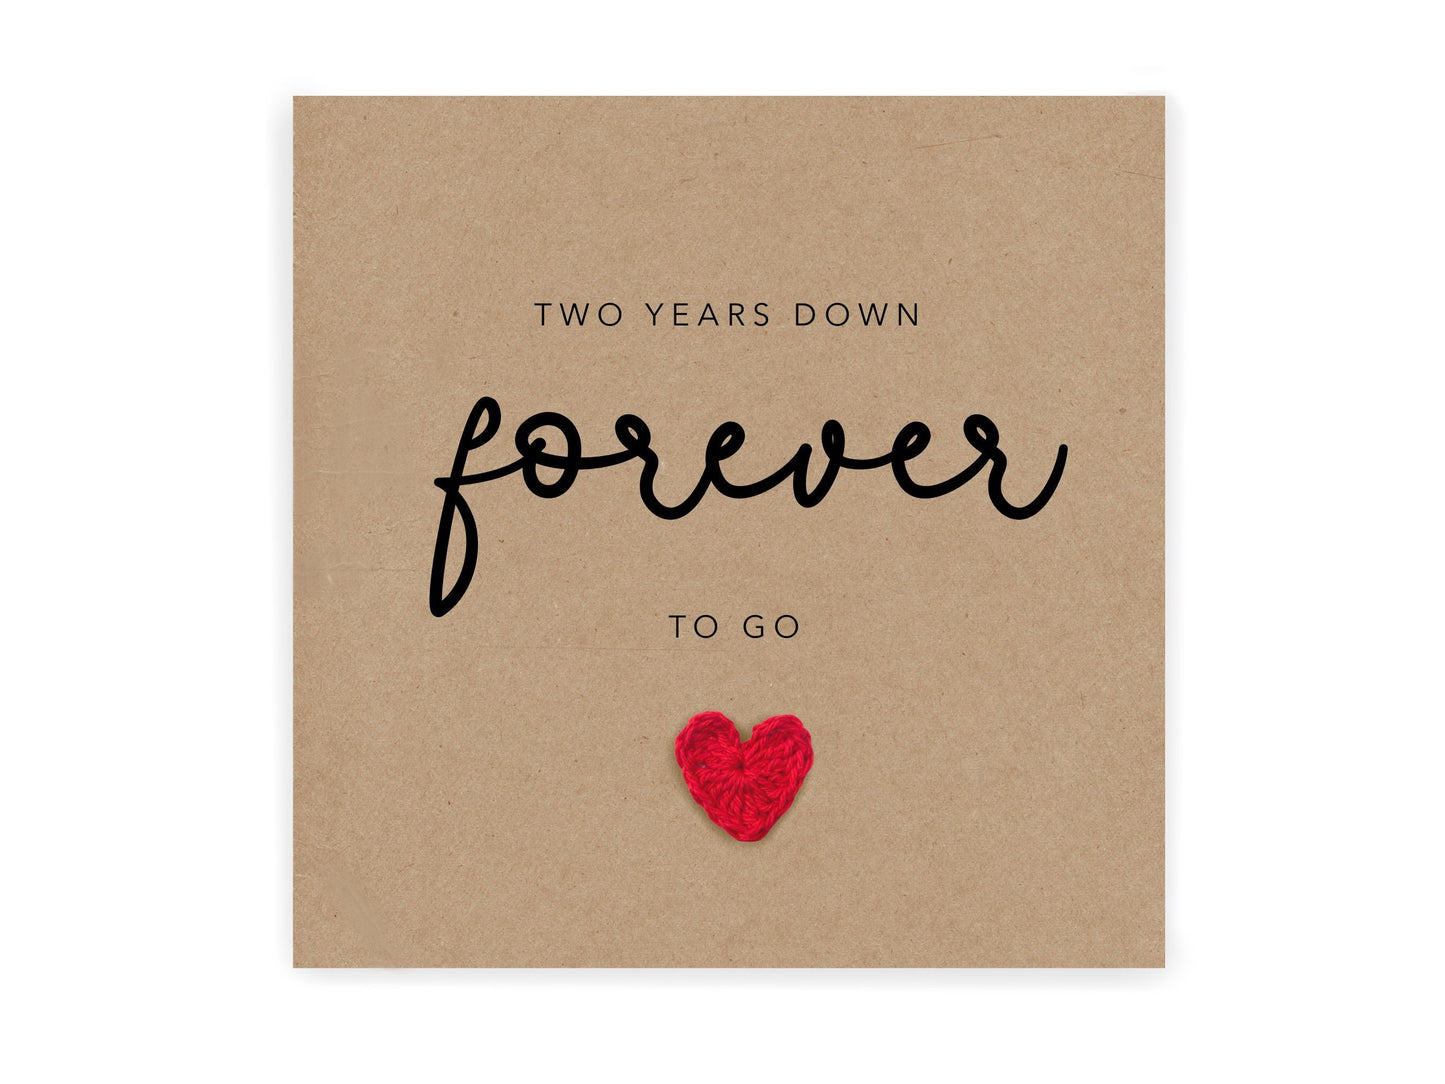 Second Wedding Anniversary Simple Rustic One Year Anniversary  Card for Husband Wife - Two years down forever to go - Send to recipient